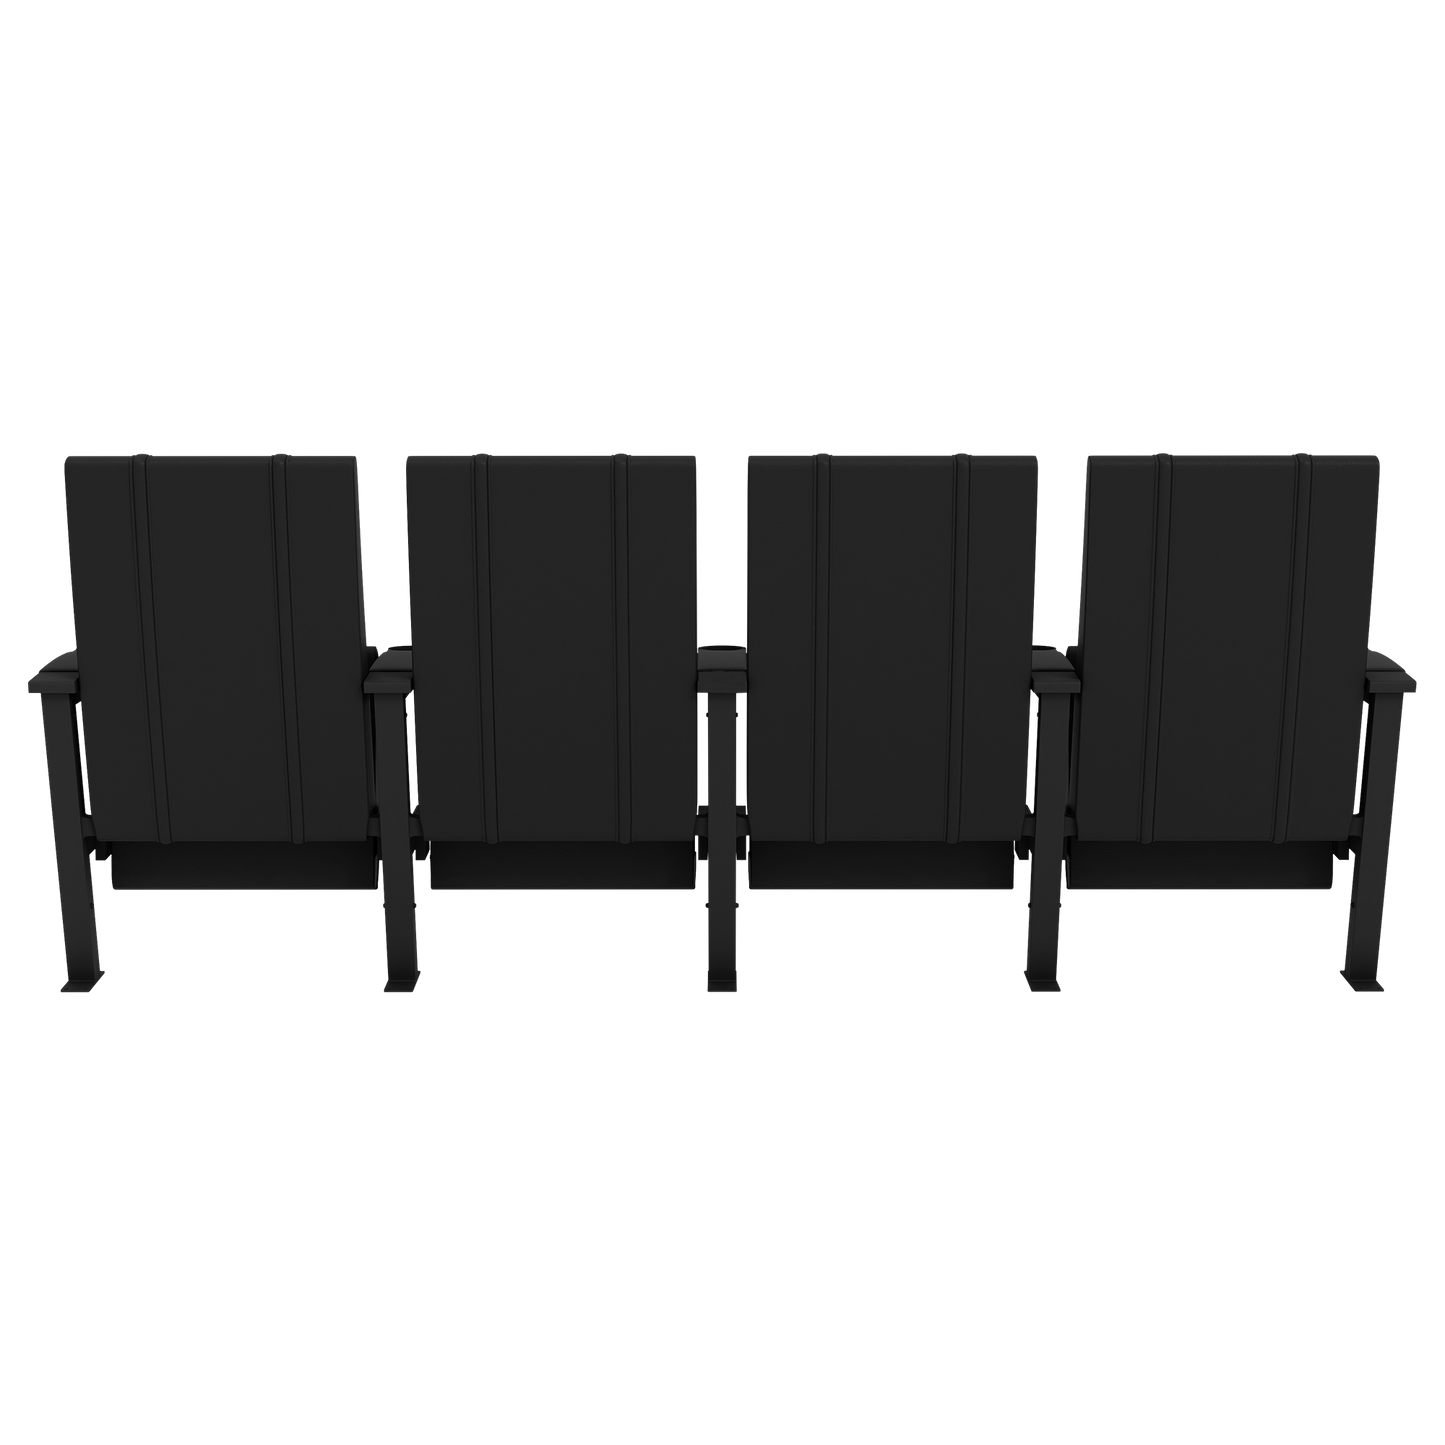 SuiteMax 3.5 VIP Seats with Nevada Wolfpack Logo